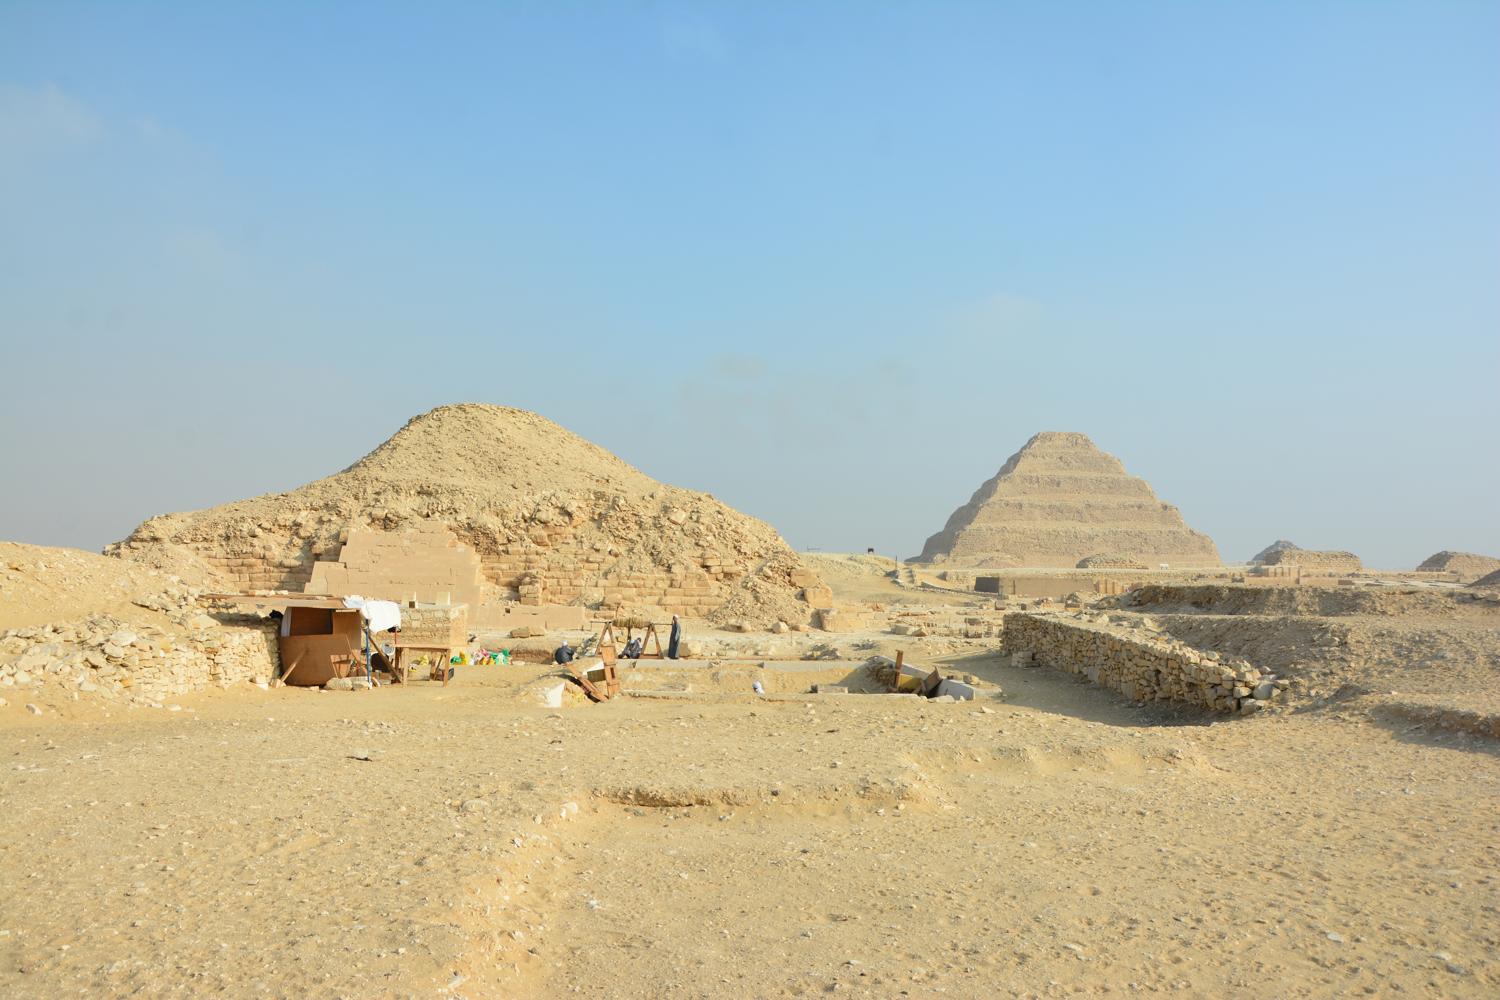 The Saqqara Saite Tombs Project excavation area, overlooking the pyramid of Unas and the step pyramid of Djoser north-facing